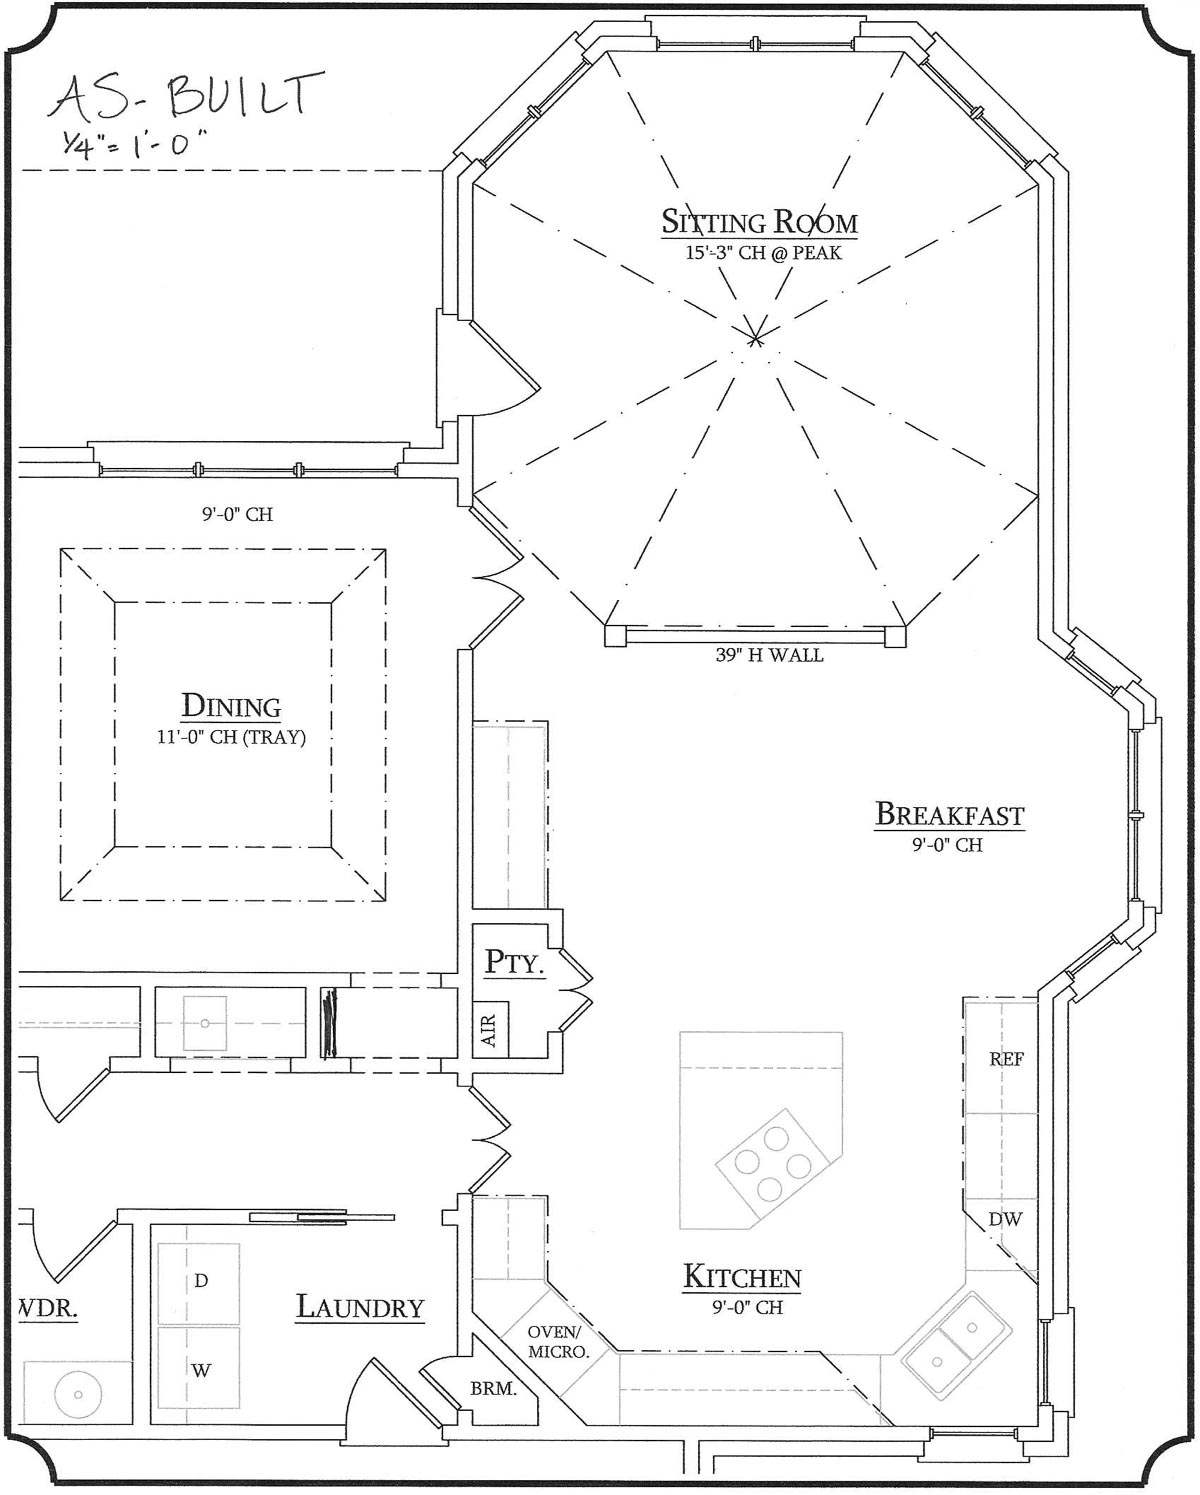 Our current kitchen layout